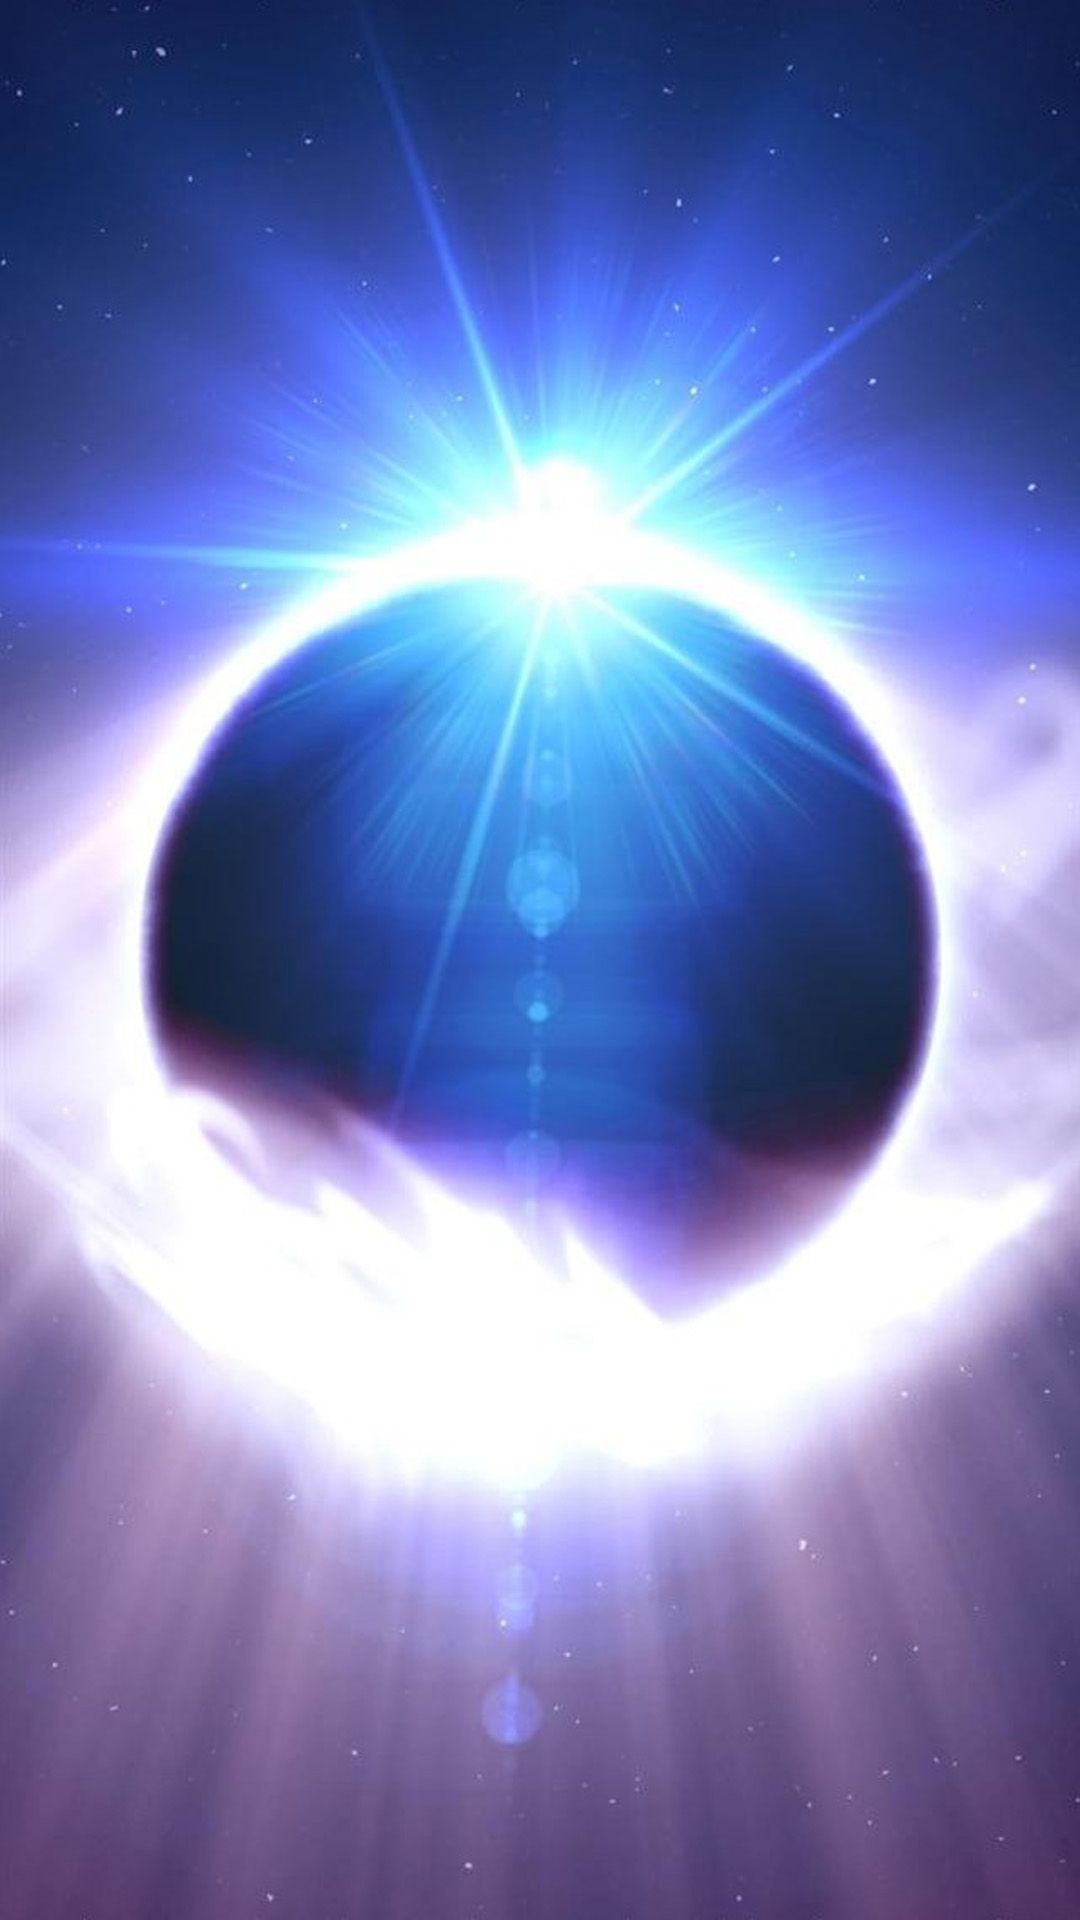 eclipse iphone wallpaper,atmosphere,lens flare,light,outer space,astronomical object